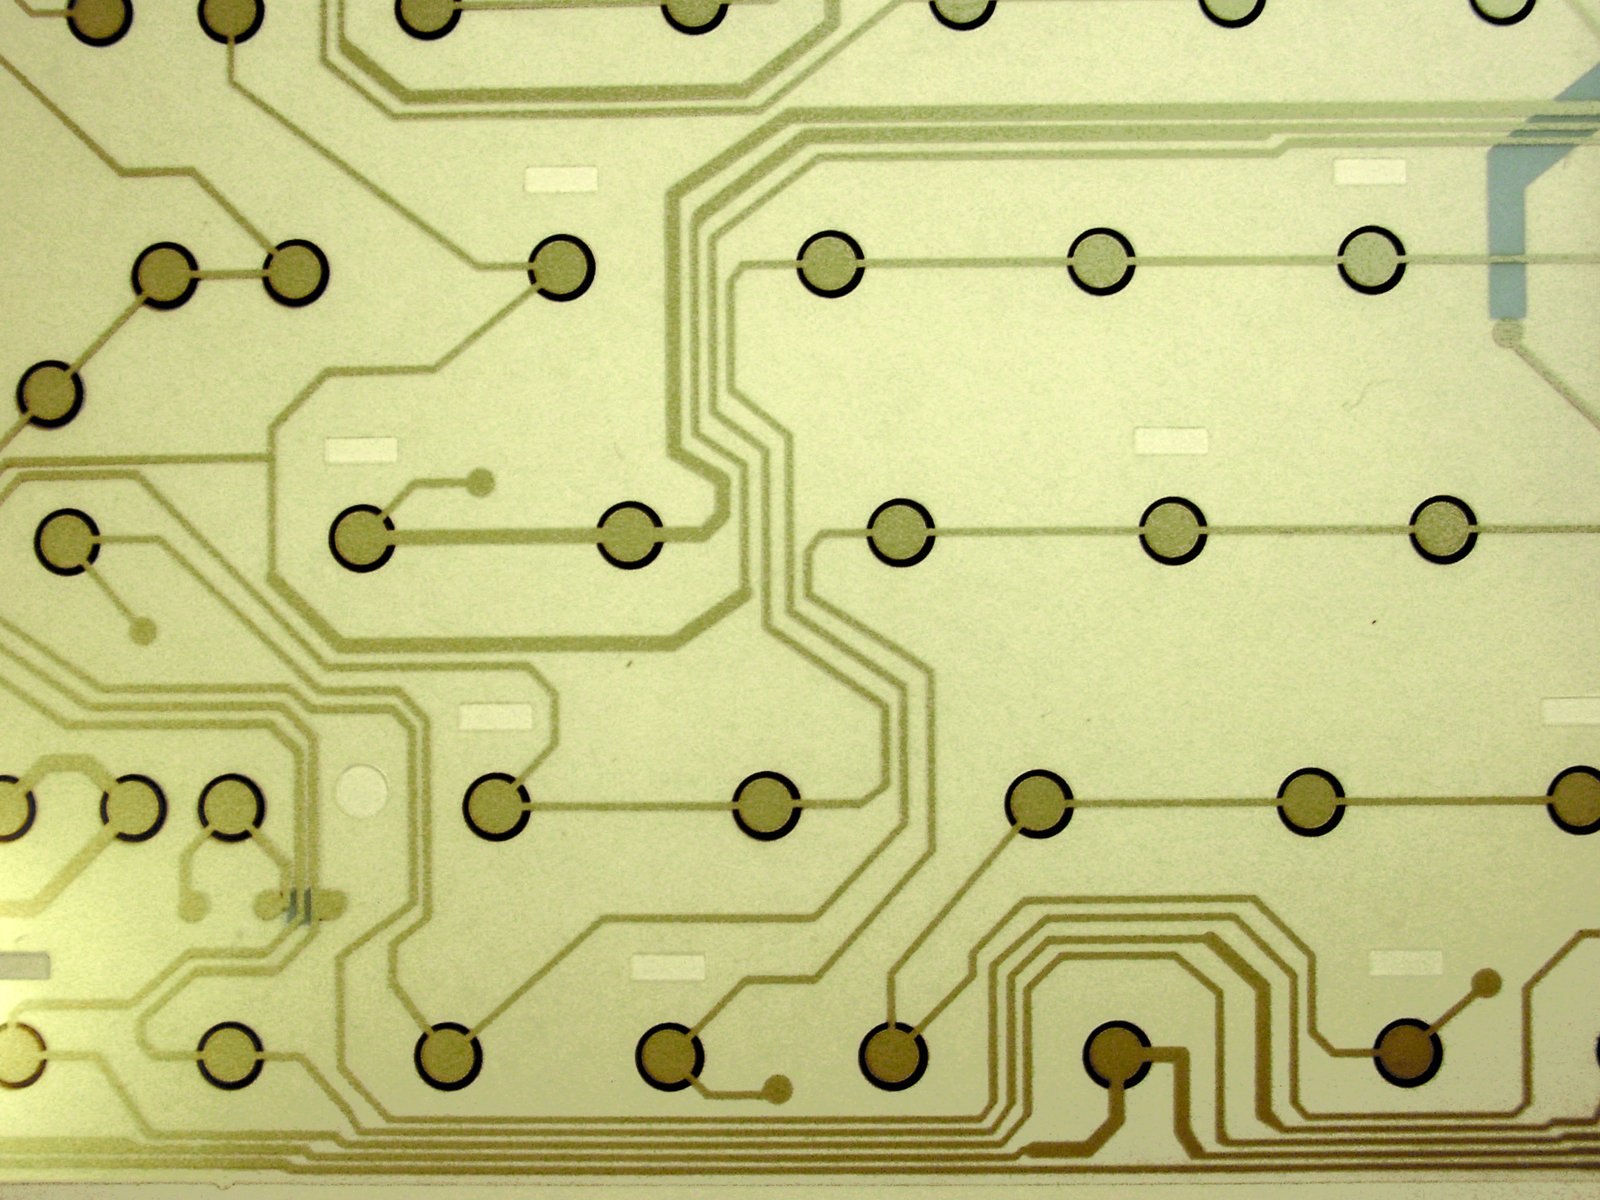 a printed circuit board with lots of small holes